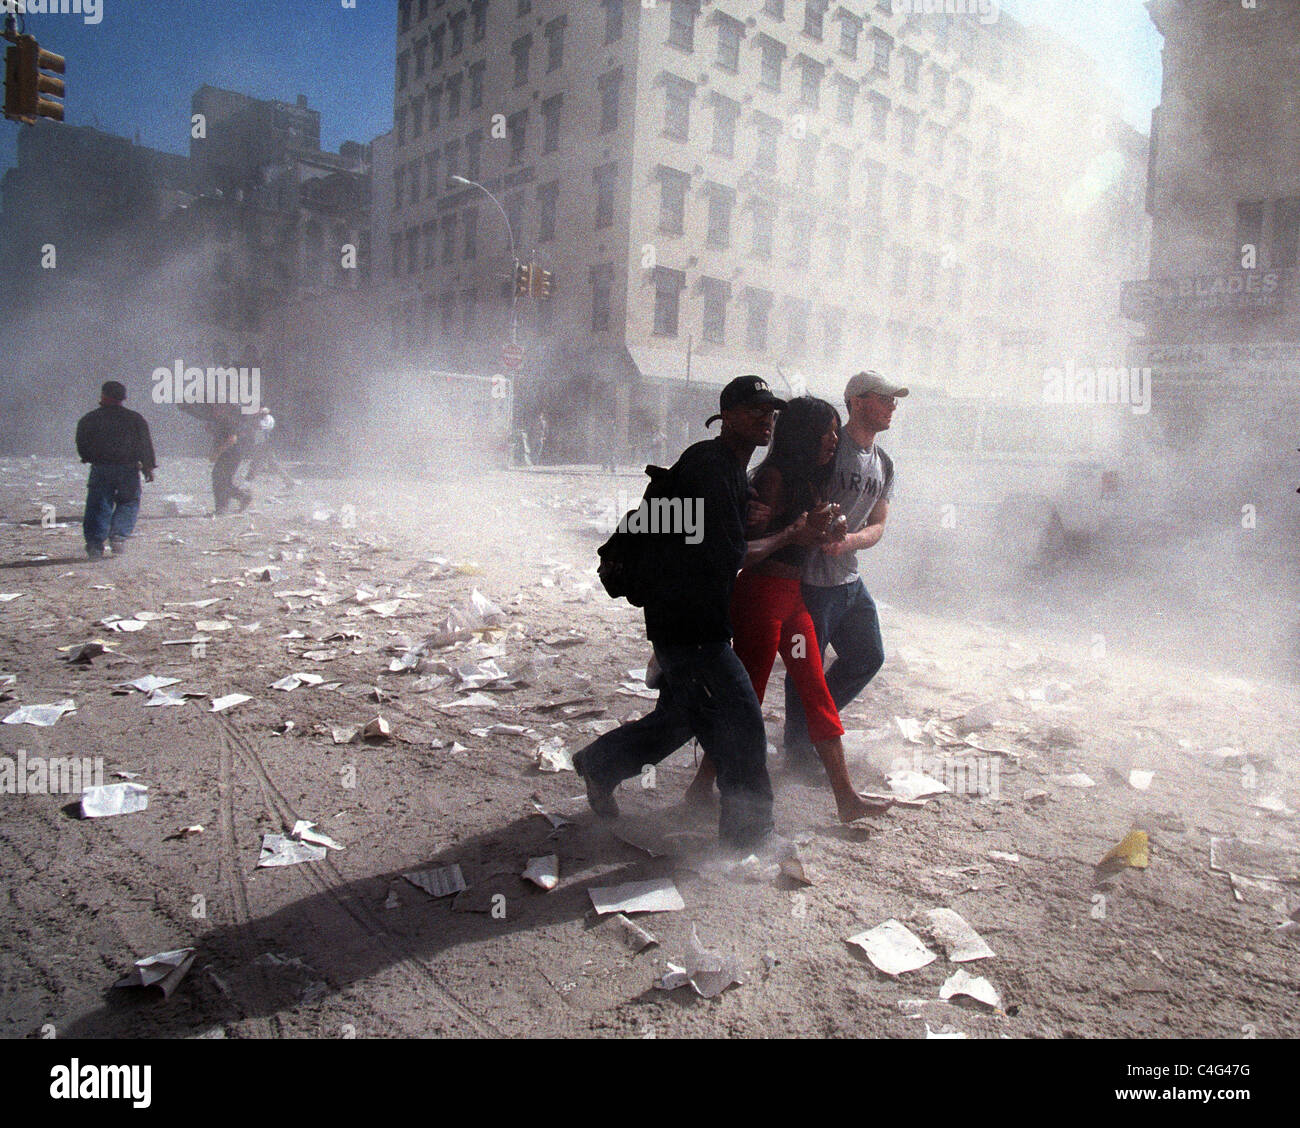 People attempt to escape the debris and concrete dust in the air on September 11, 2001 after WTC terrorist attack Stock Photo